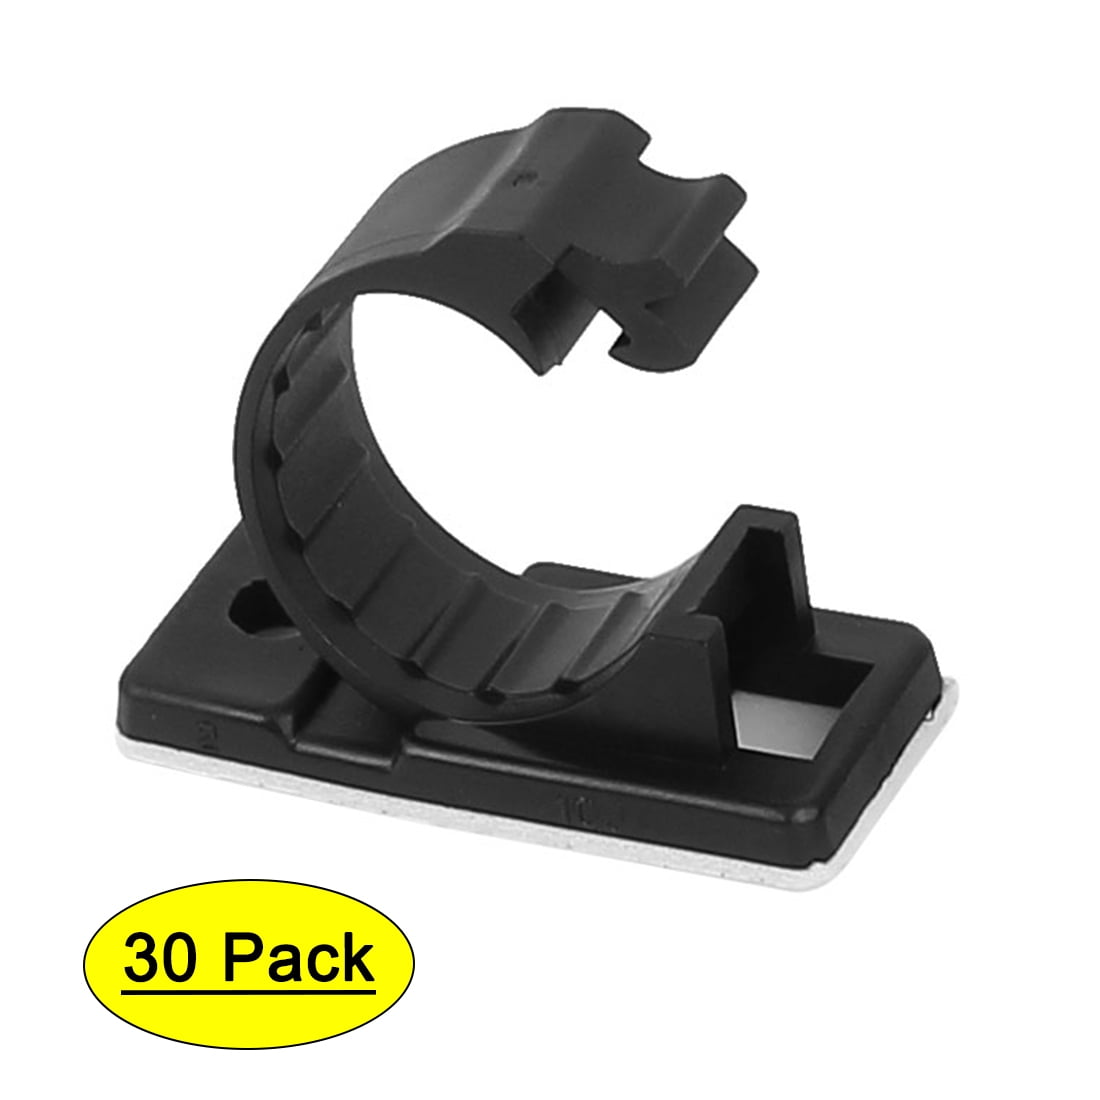 Cable Clip Adhsiv.563cd4